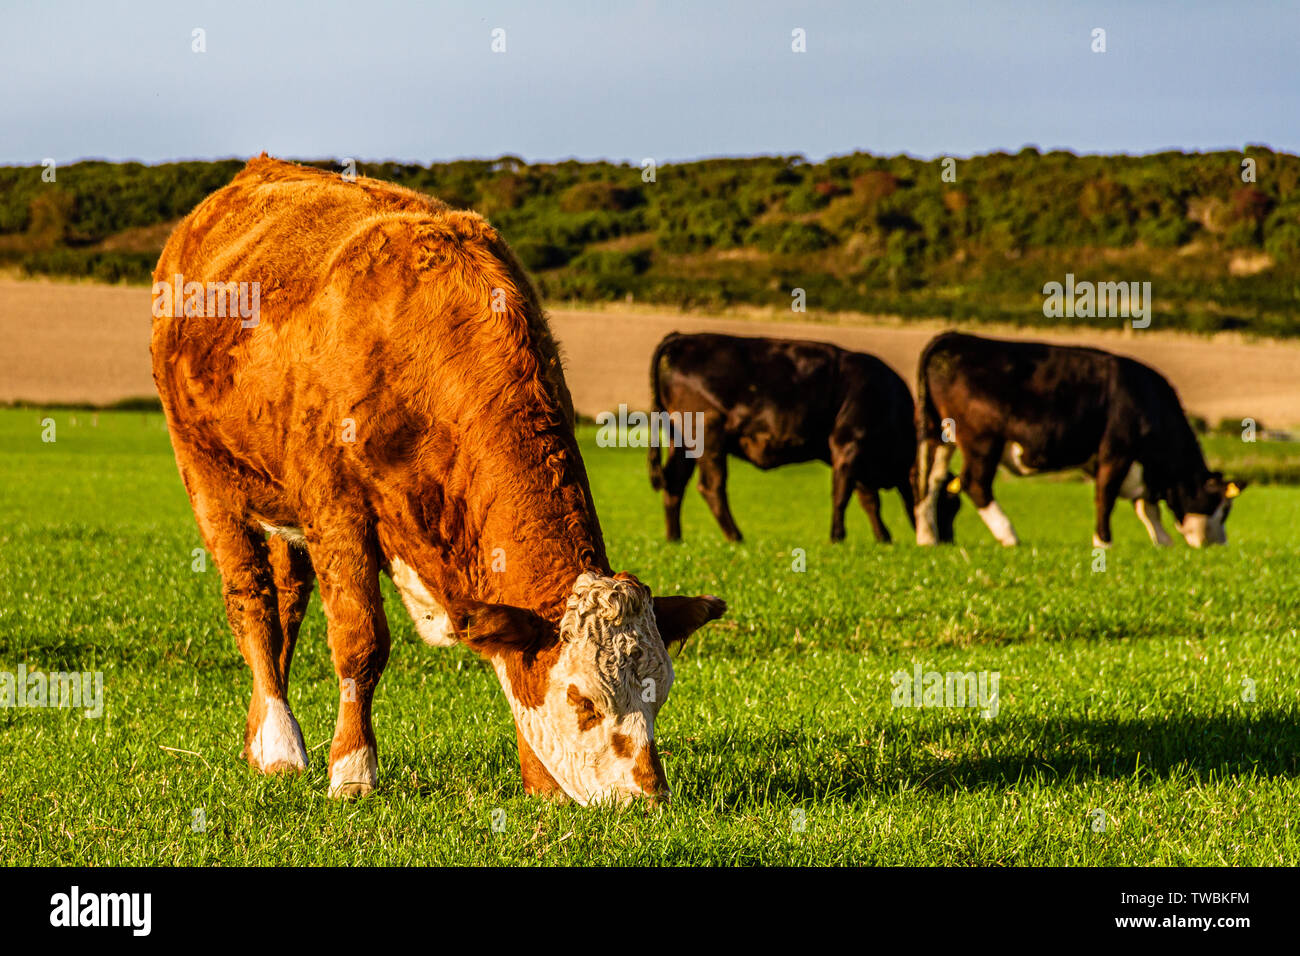 Cattle grazing in a field in Northumberland, UK. September 2018. Stock Photo